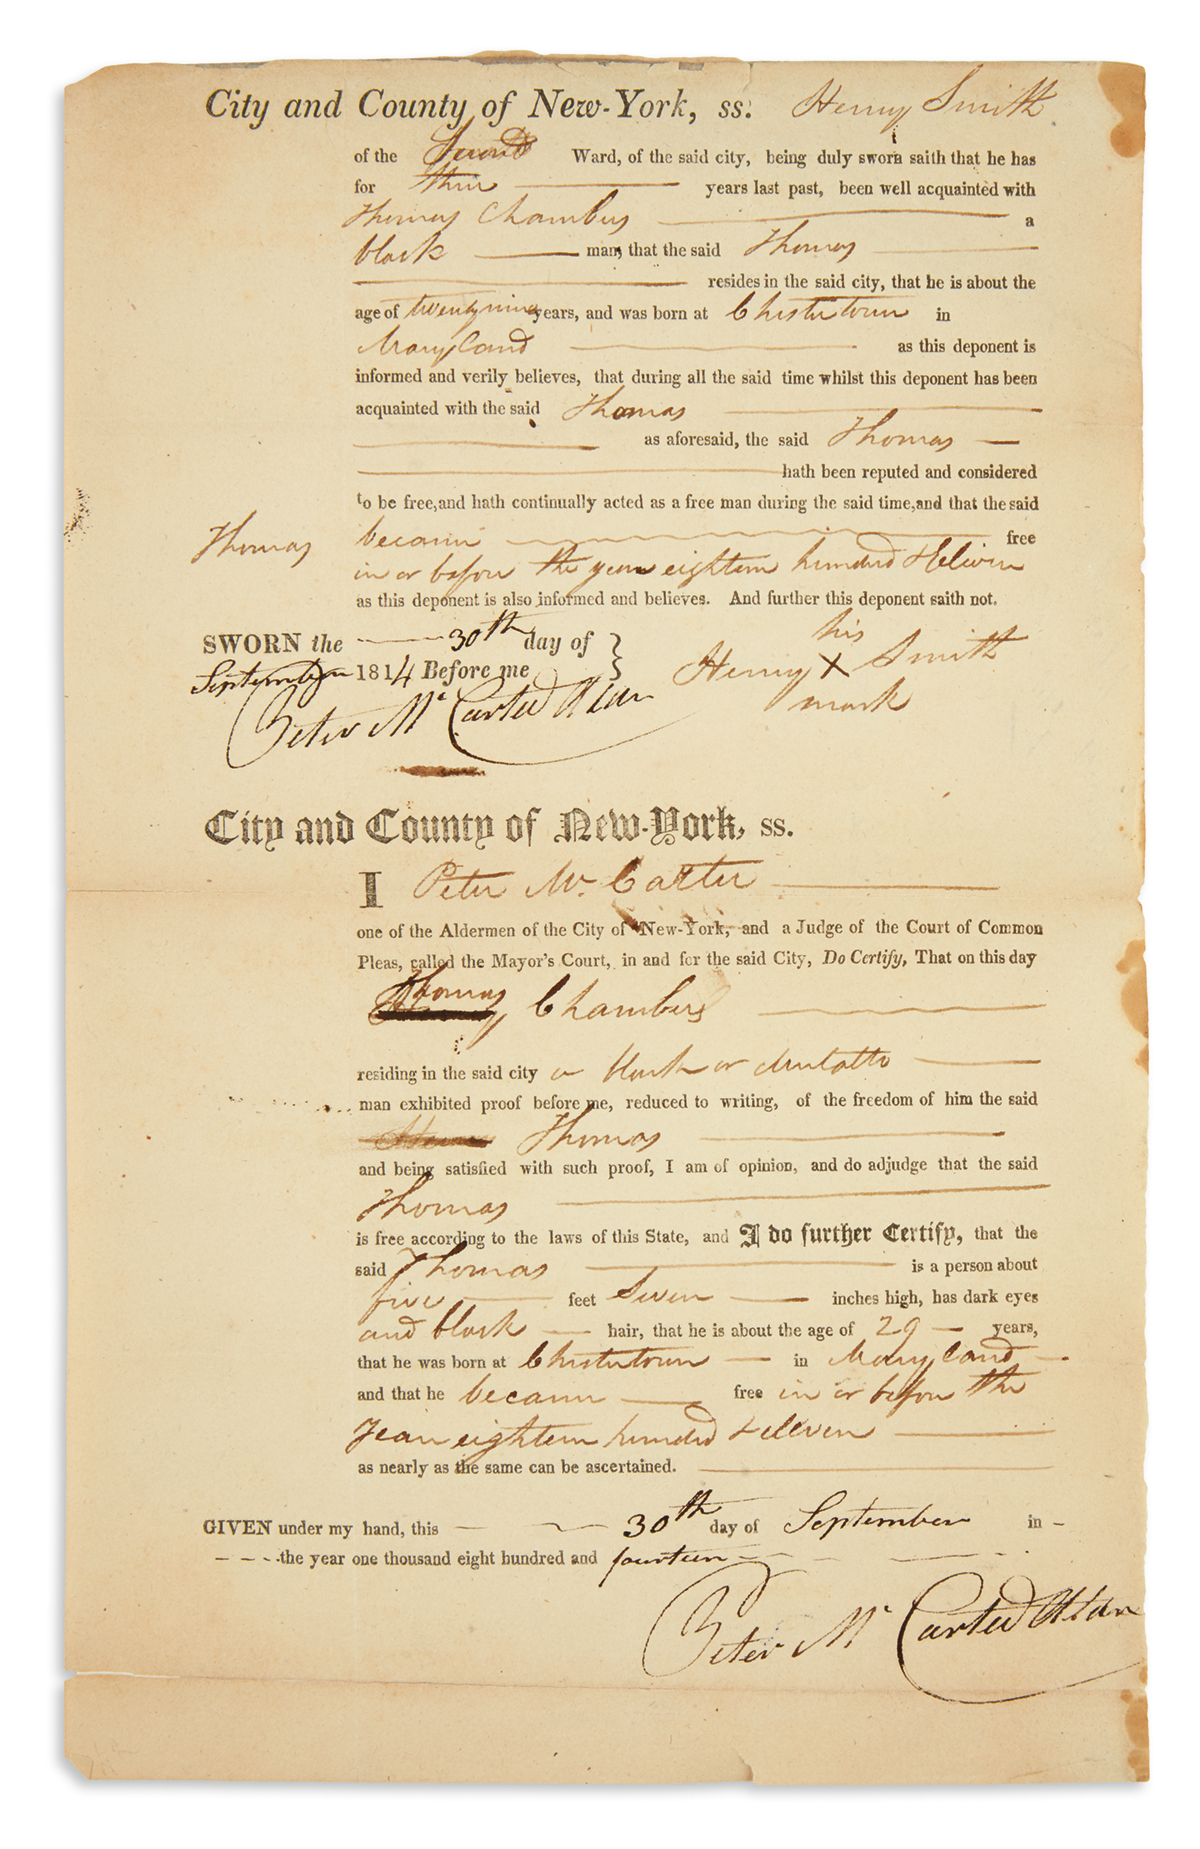 (SLAVERY AND ABOLITION.) Certificate of freedom issued in New York.